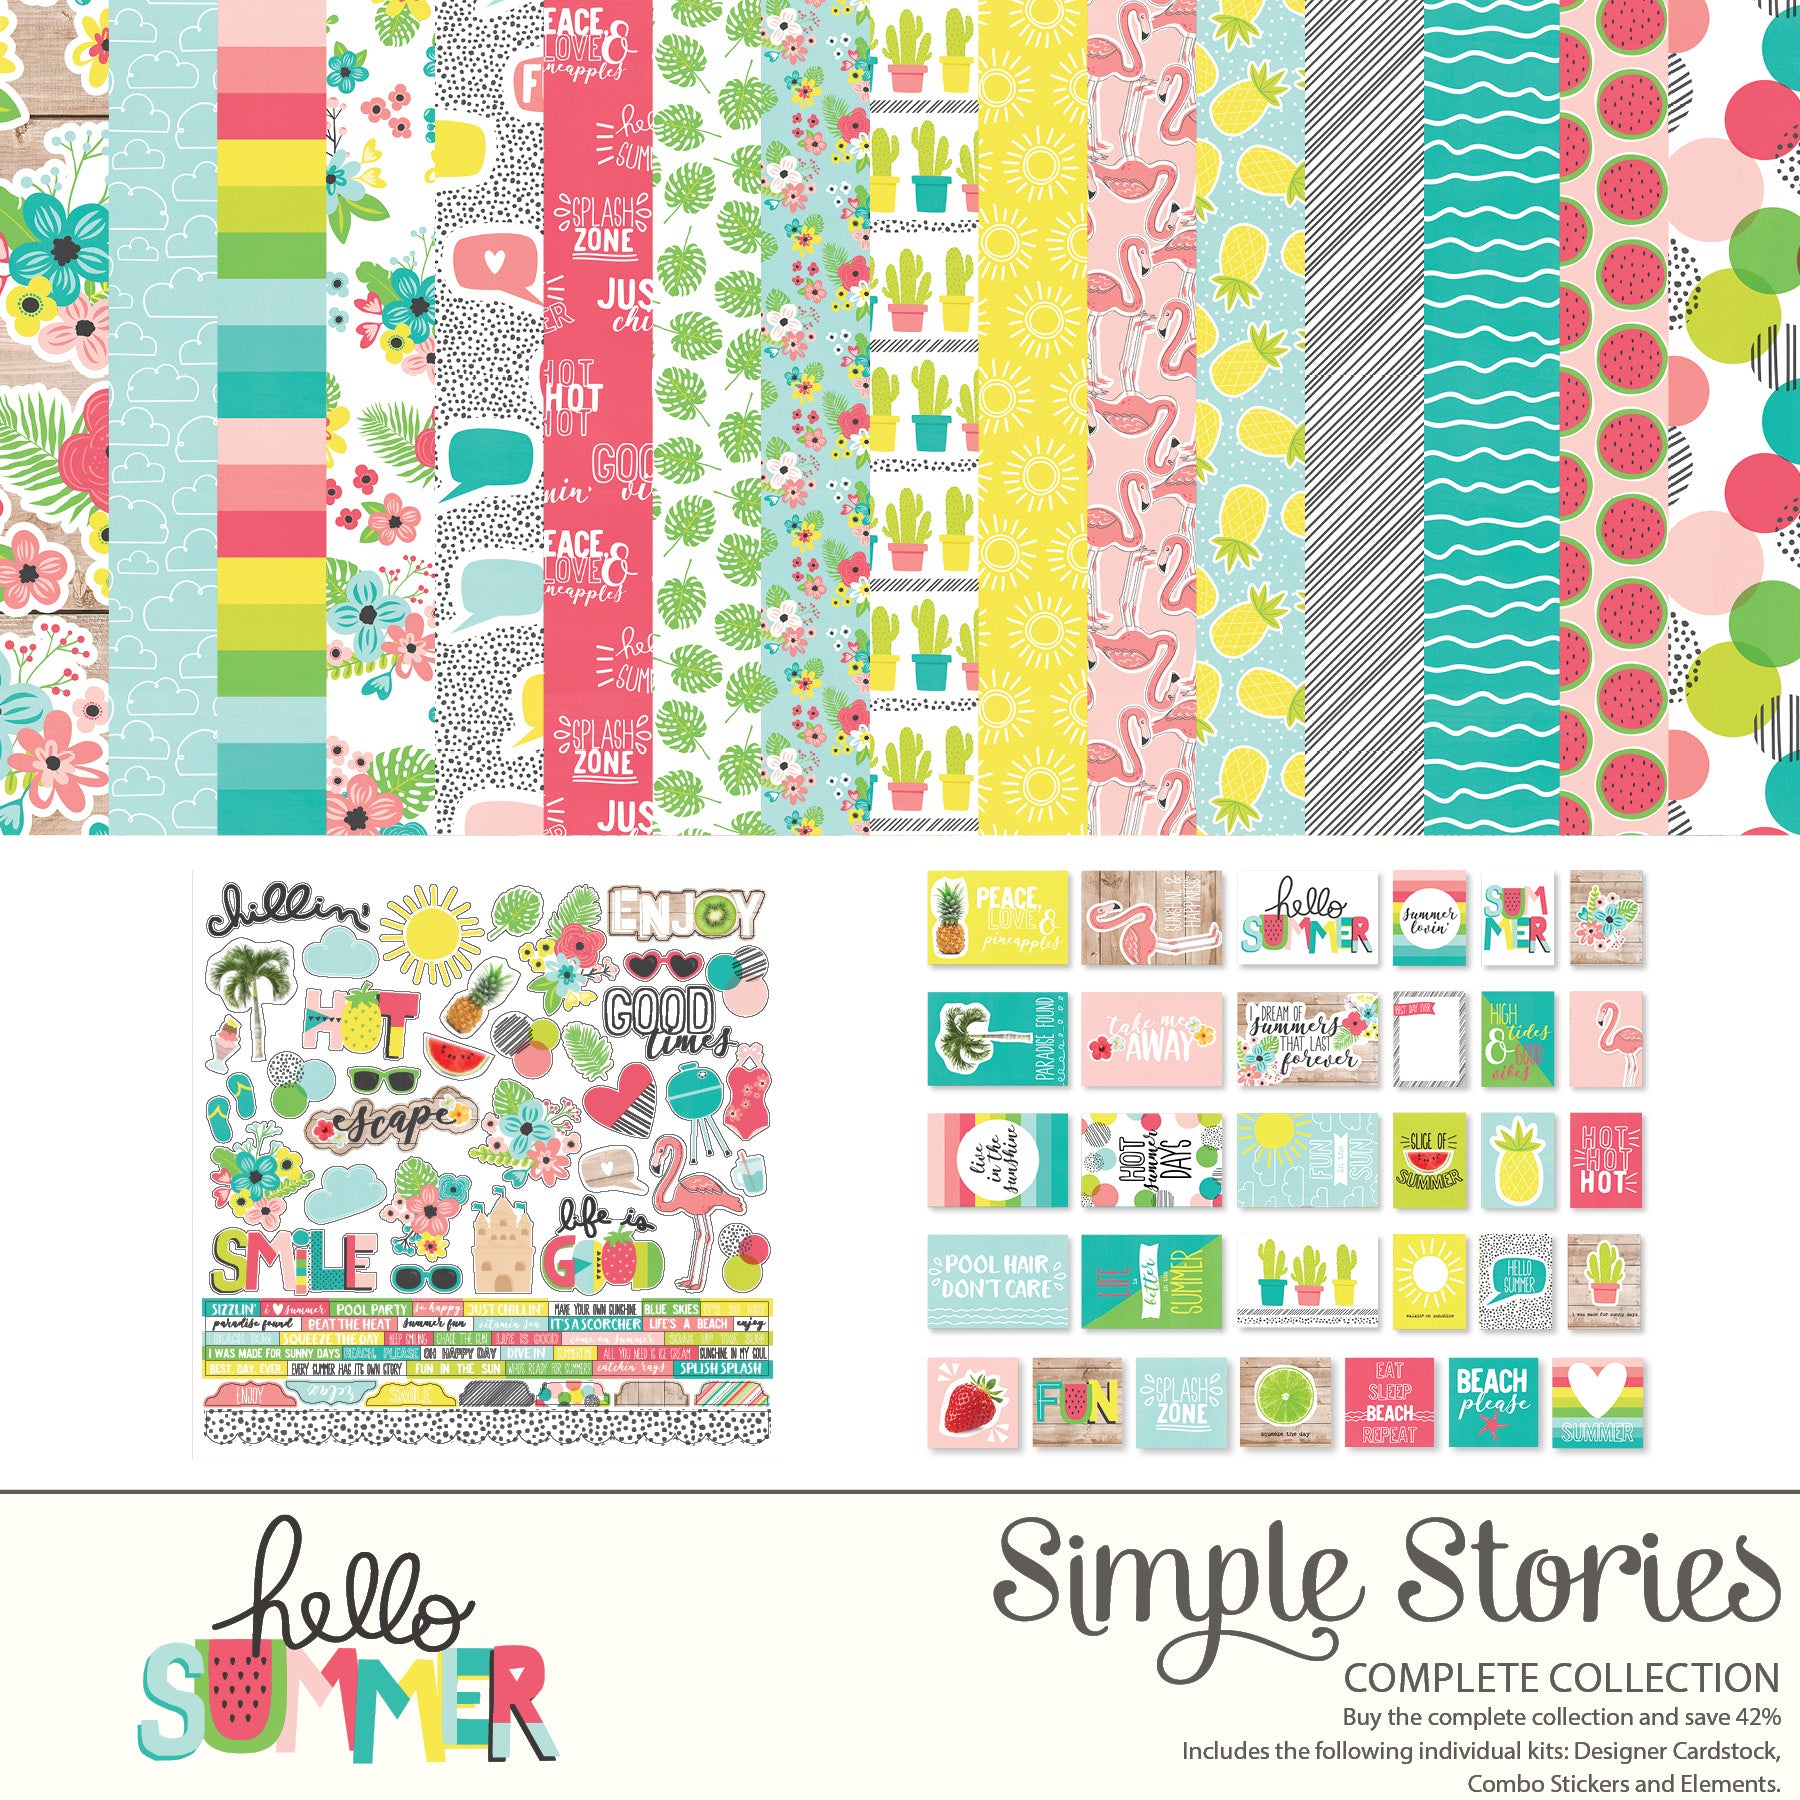 Family Fun - Collection Kit – Simple Stories